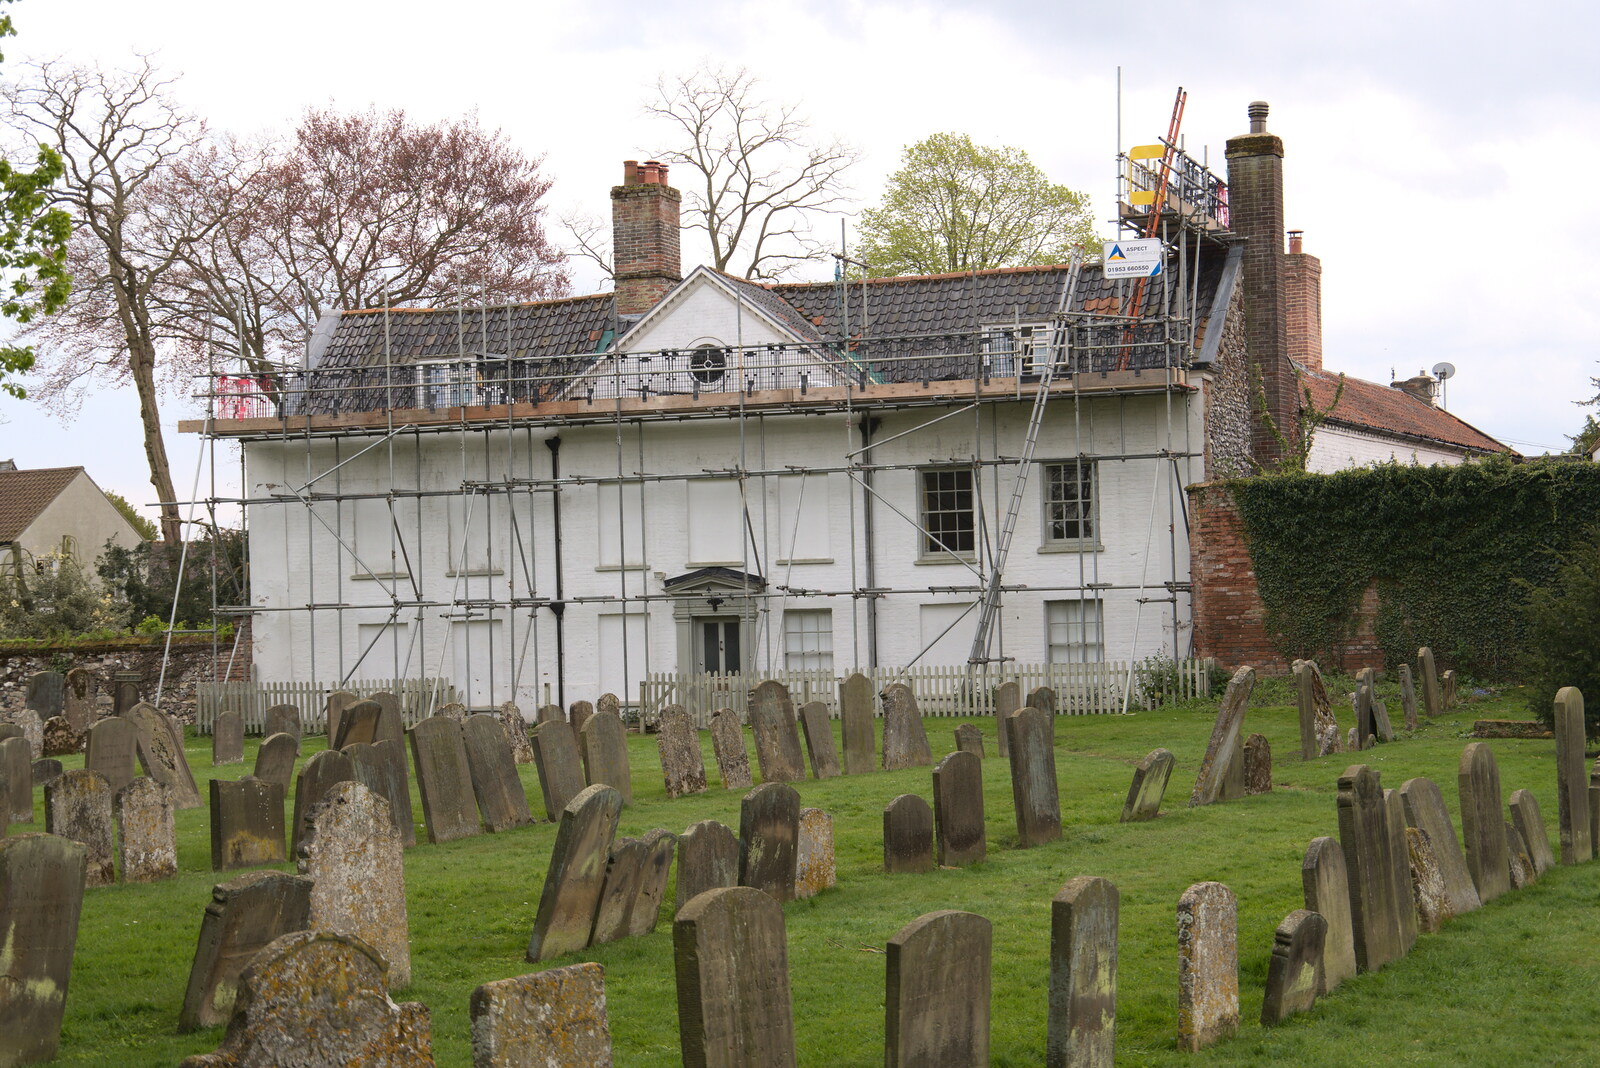 A big house with not many real windows from A Vaccination Afternoon, Swaffham, Norfolk - 9th May 2021